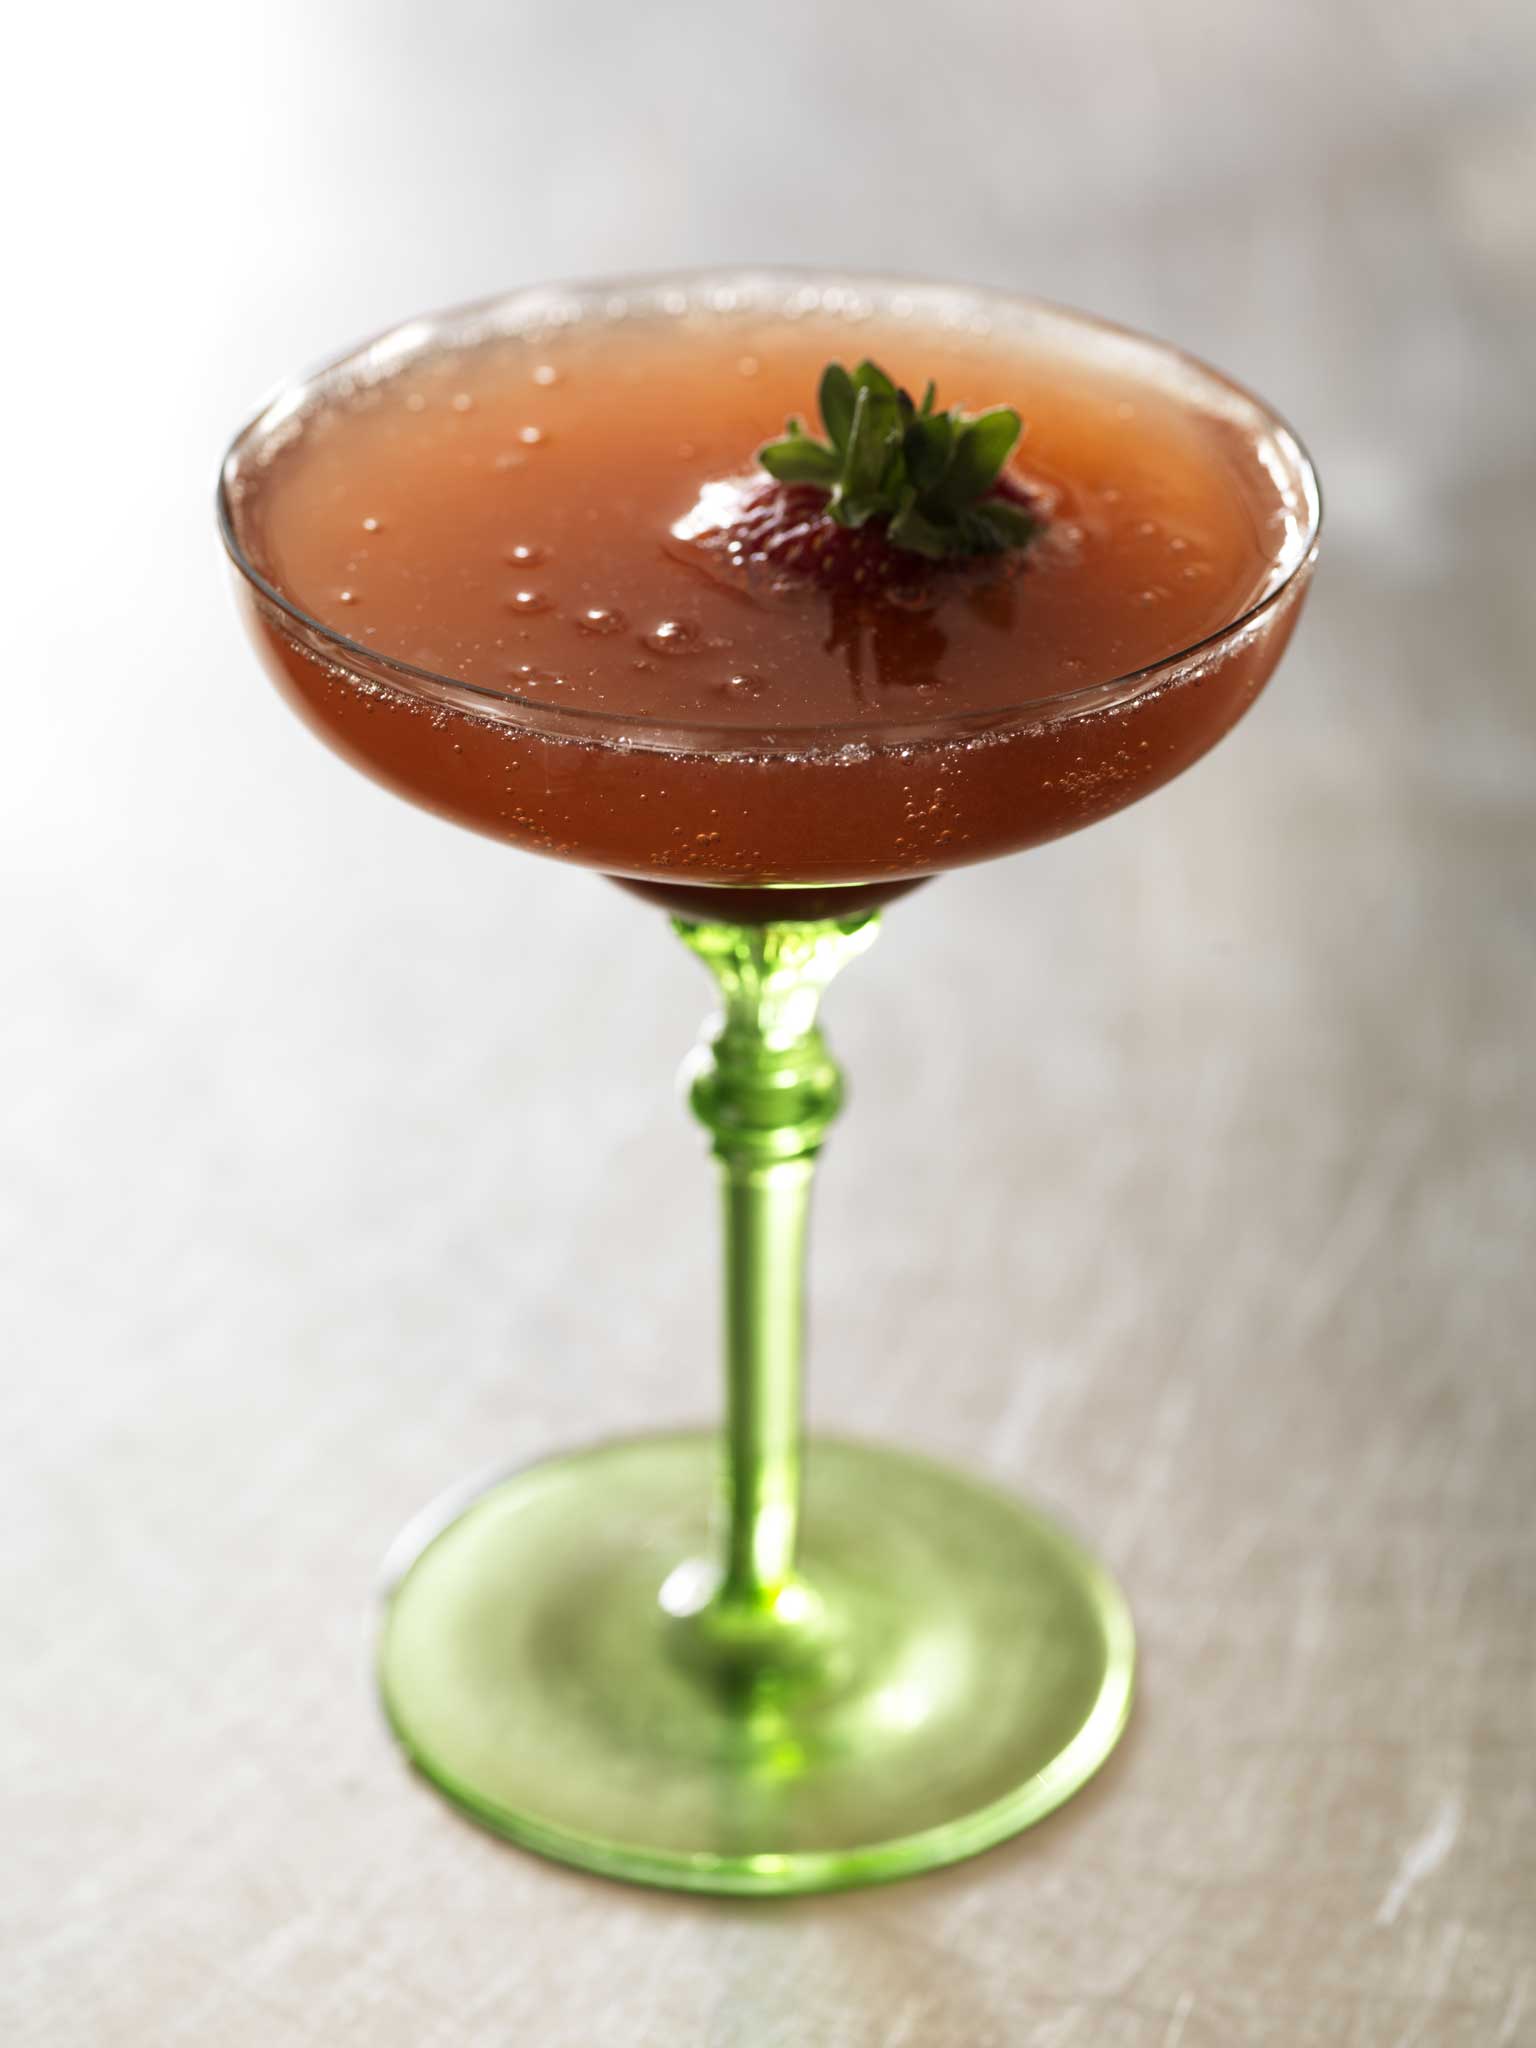 Simple and summery: Mark's strawberry Bellini